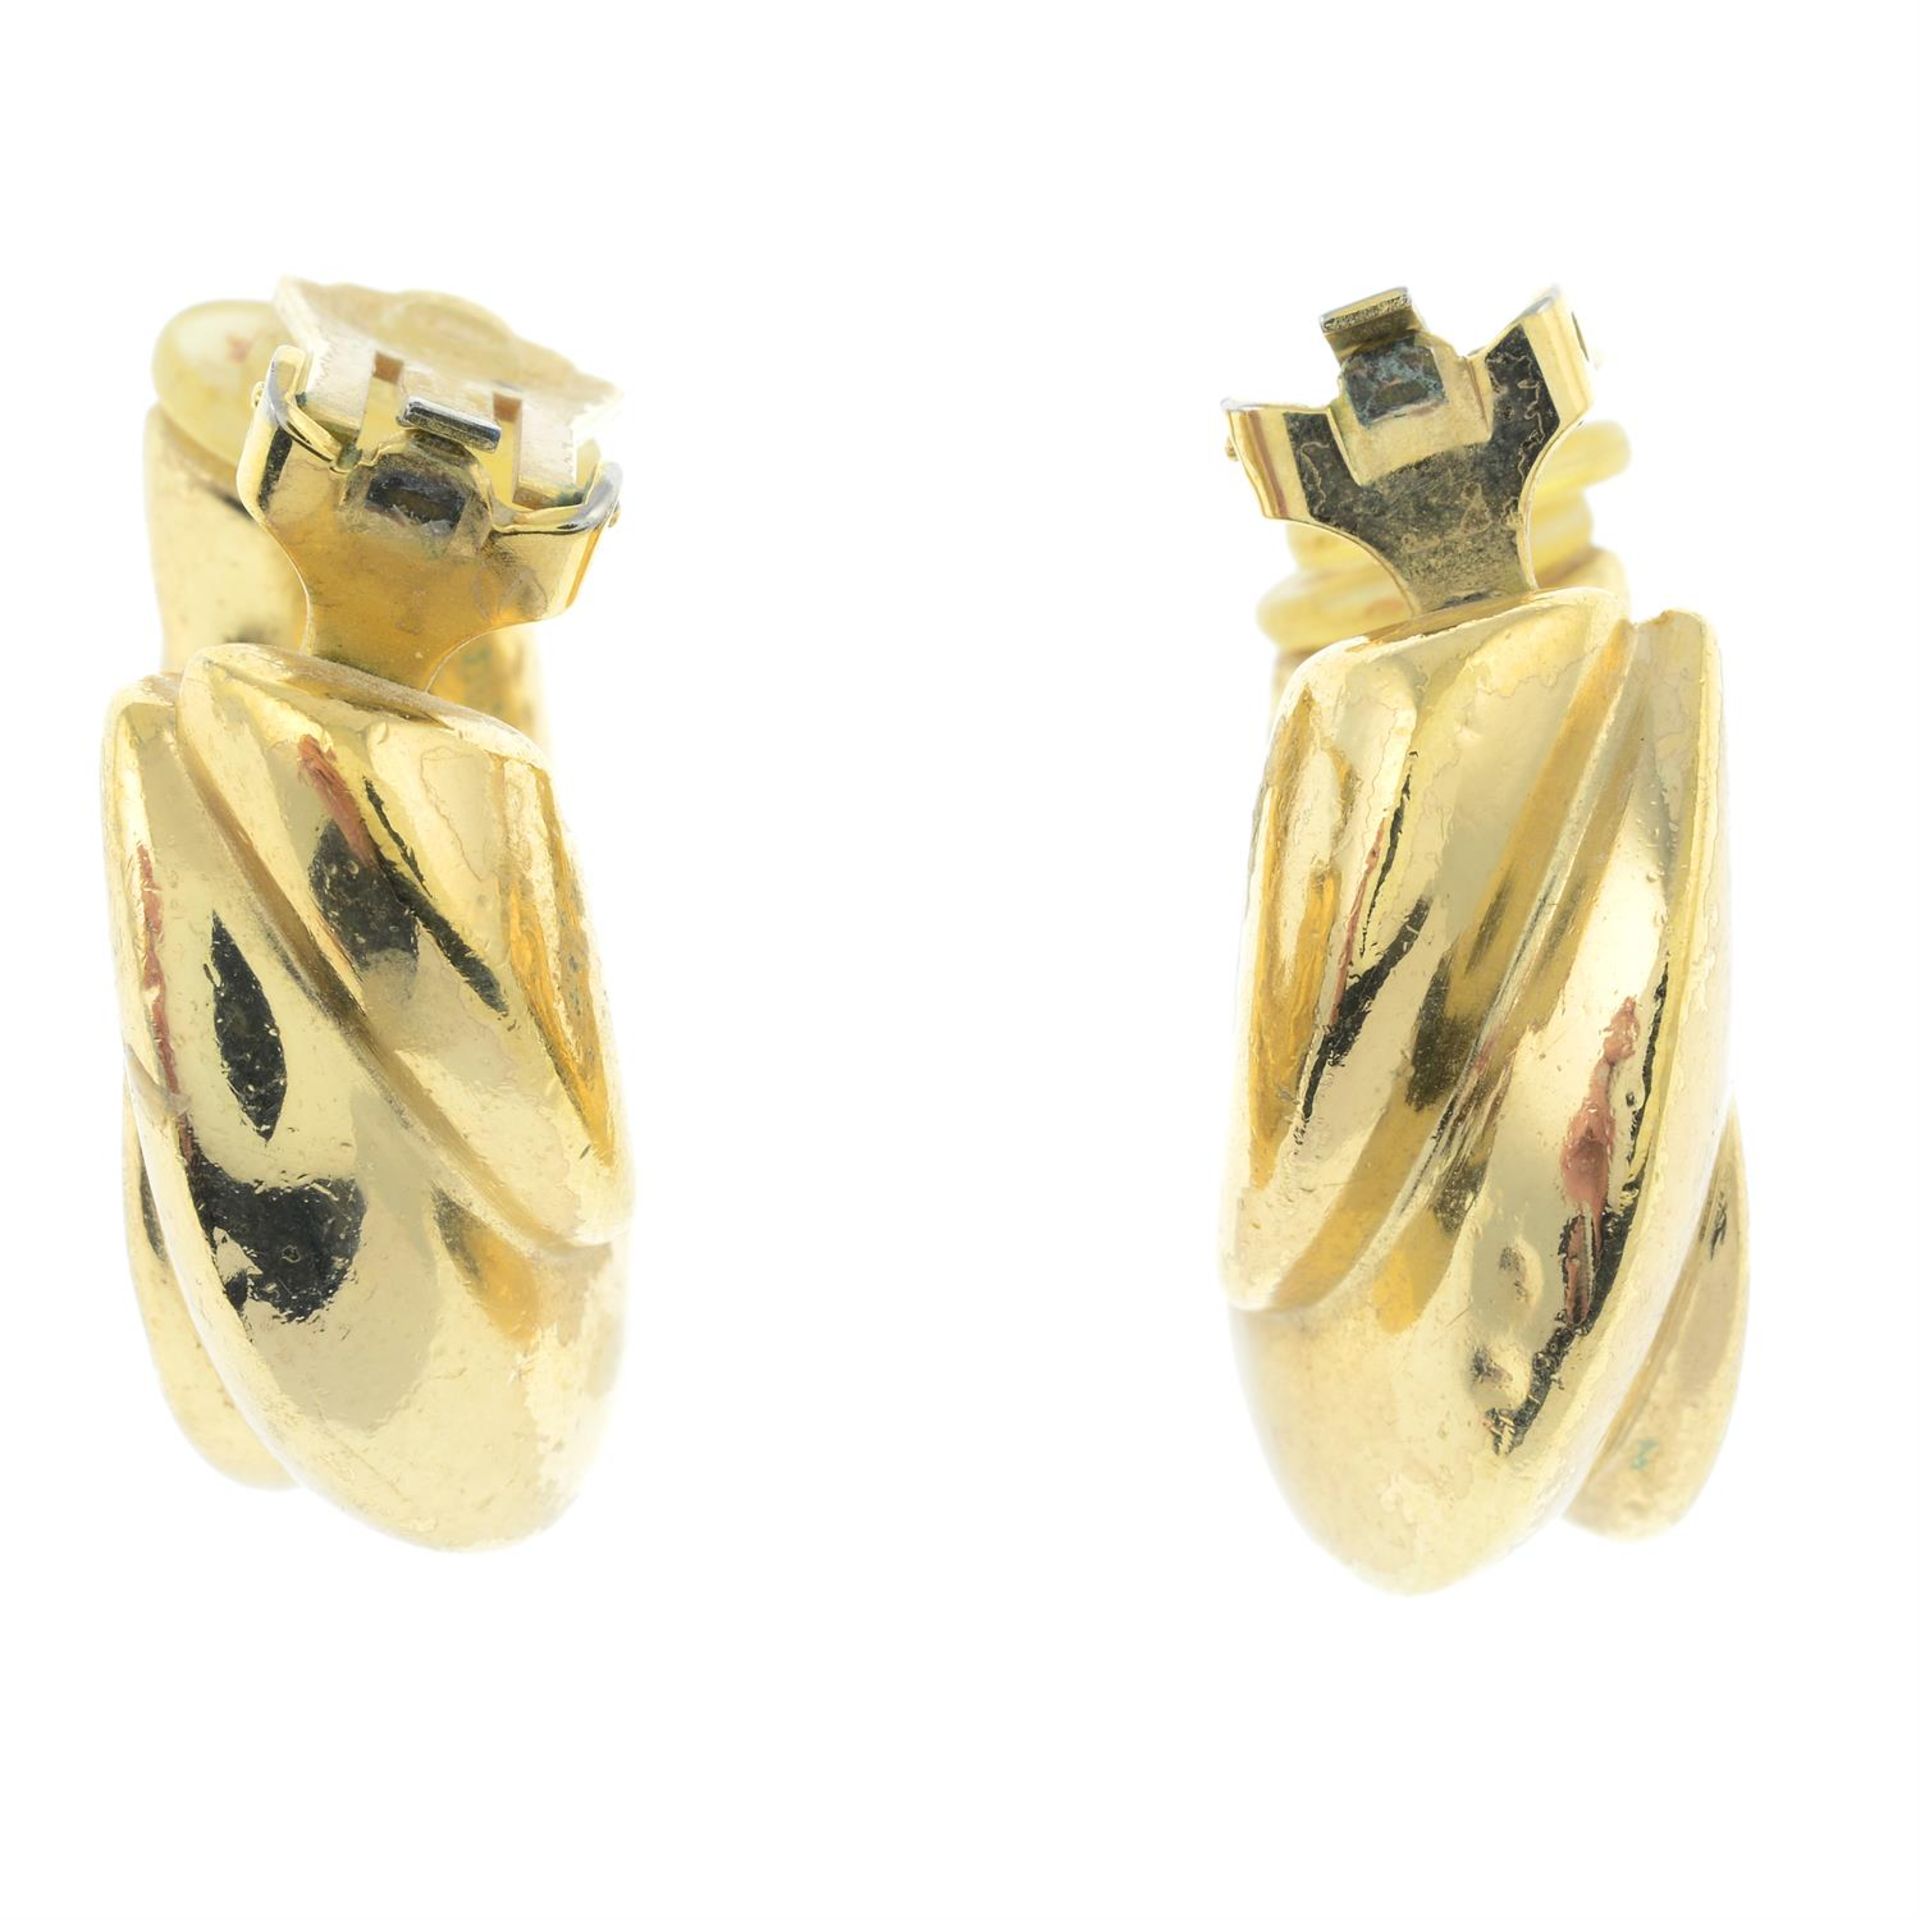 CHRISTIAN DIOR- a pair of clip-on earrings.